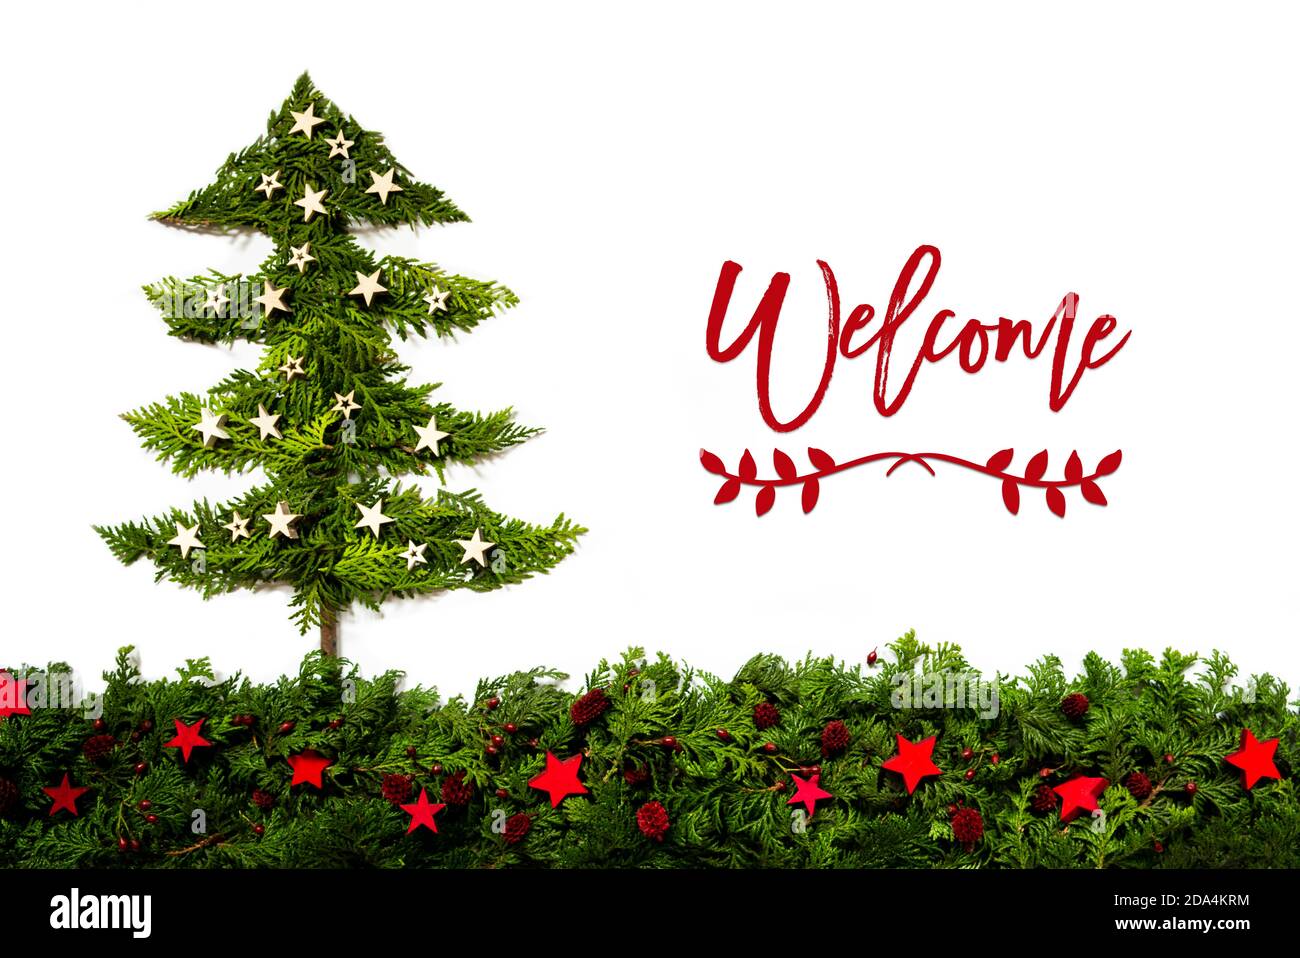 Christmas Tree Made Of Fir Branch, Text Welcome Stock Photo